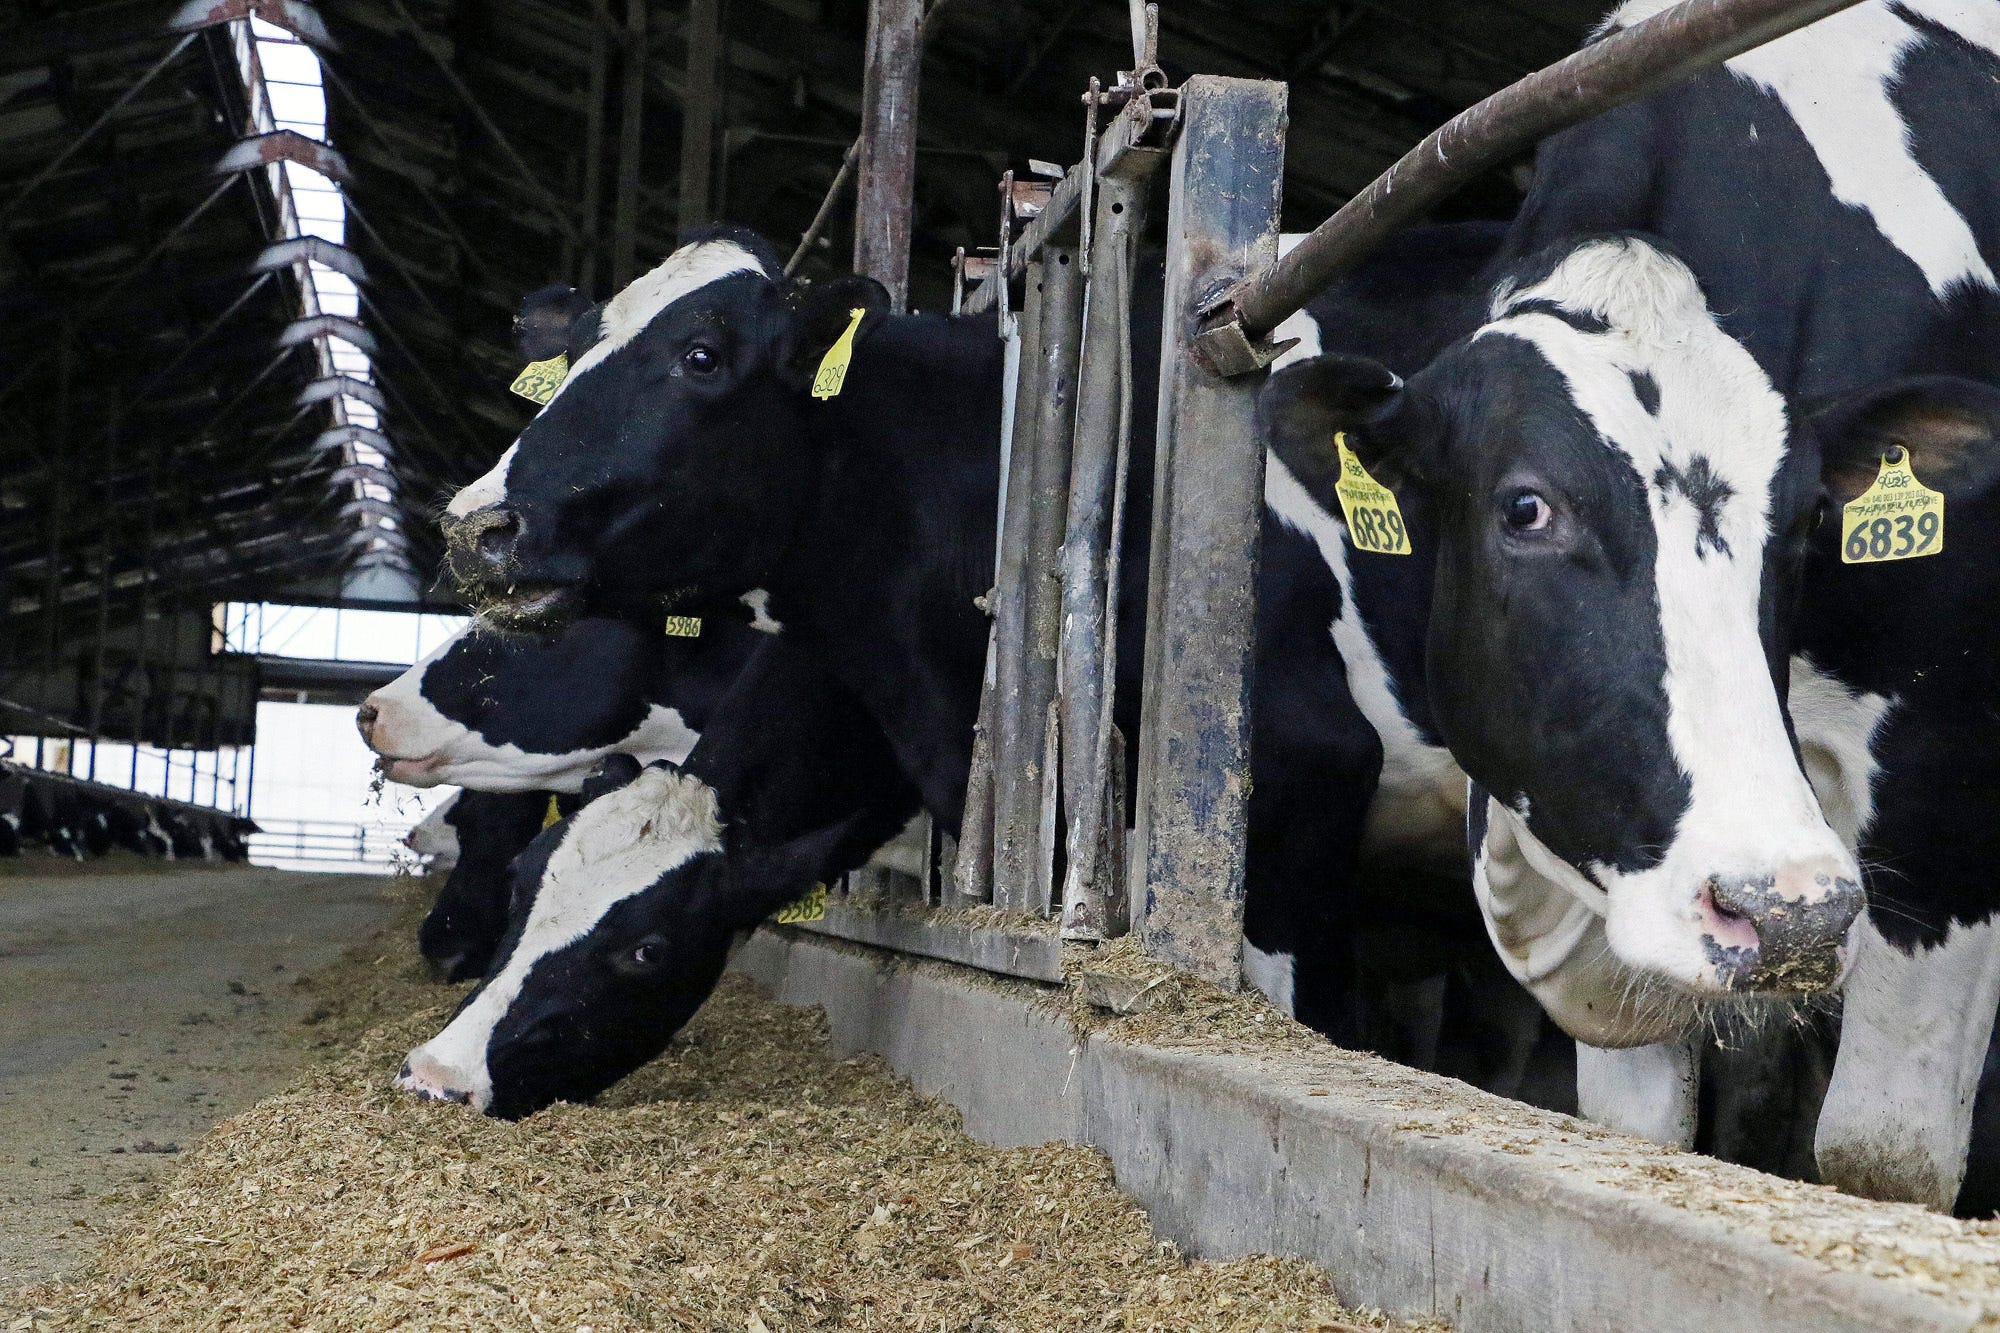 Dairy producers responded to the higher milk prices in May and June, increasing both cow numbers and milk production, driving up the milk supply. Milk prices are forecast to fall back to the $16/cwt mark for the rest of the year.